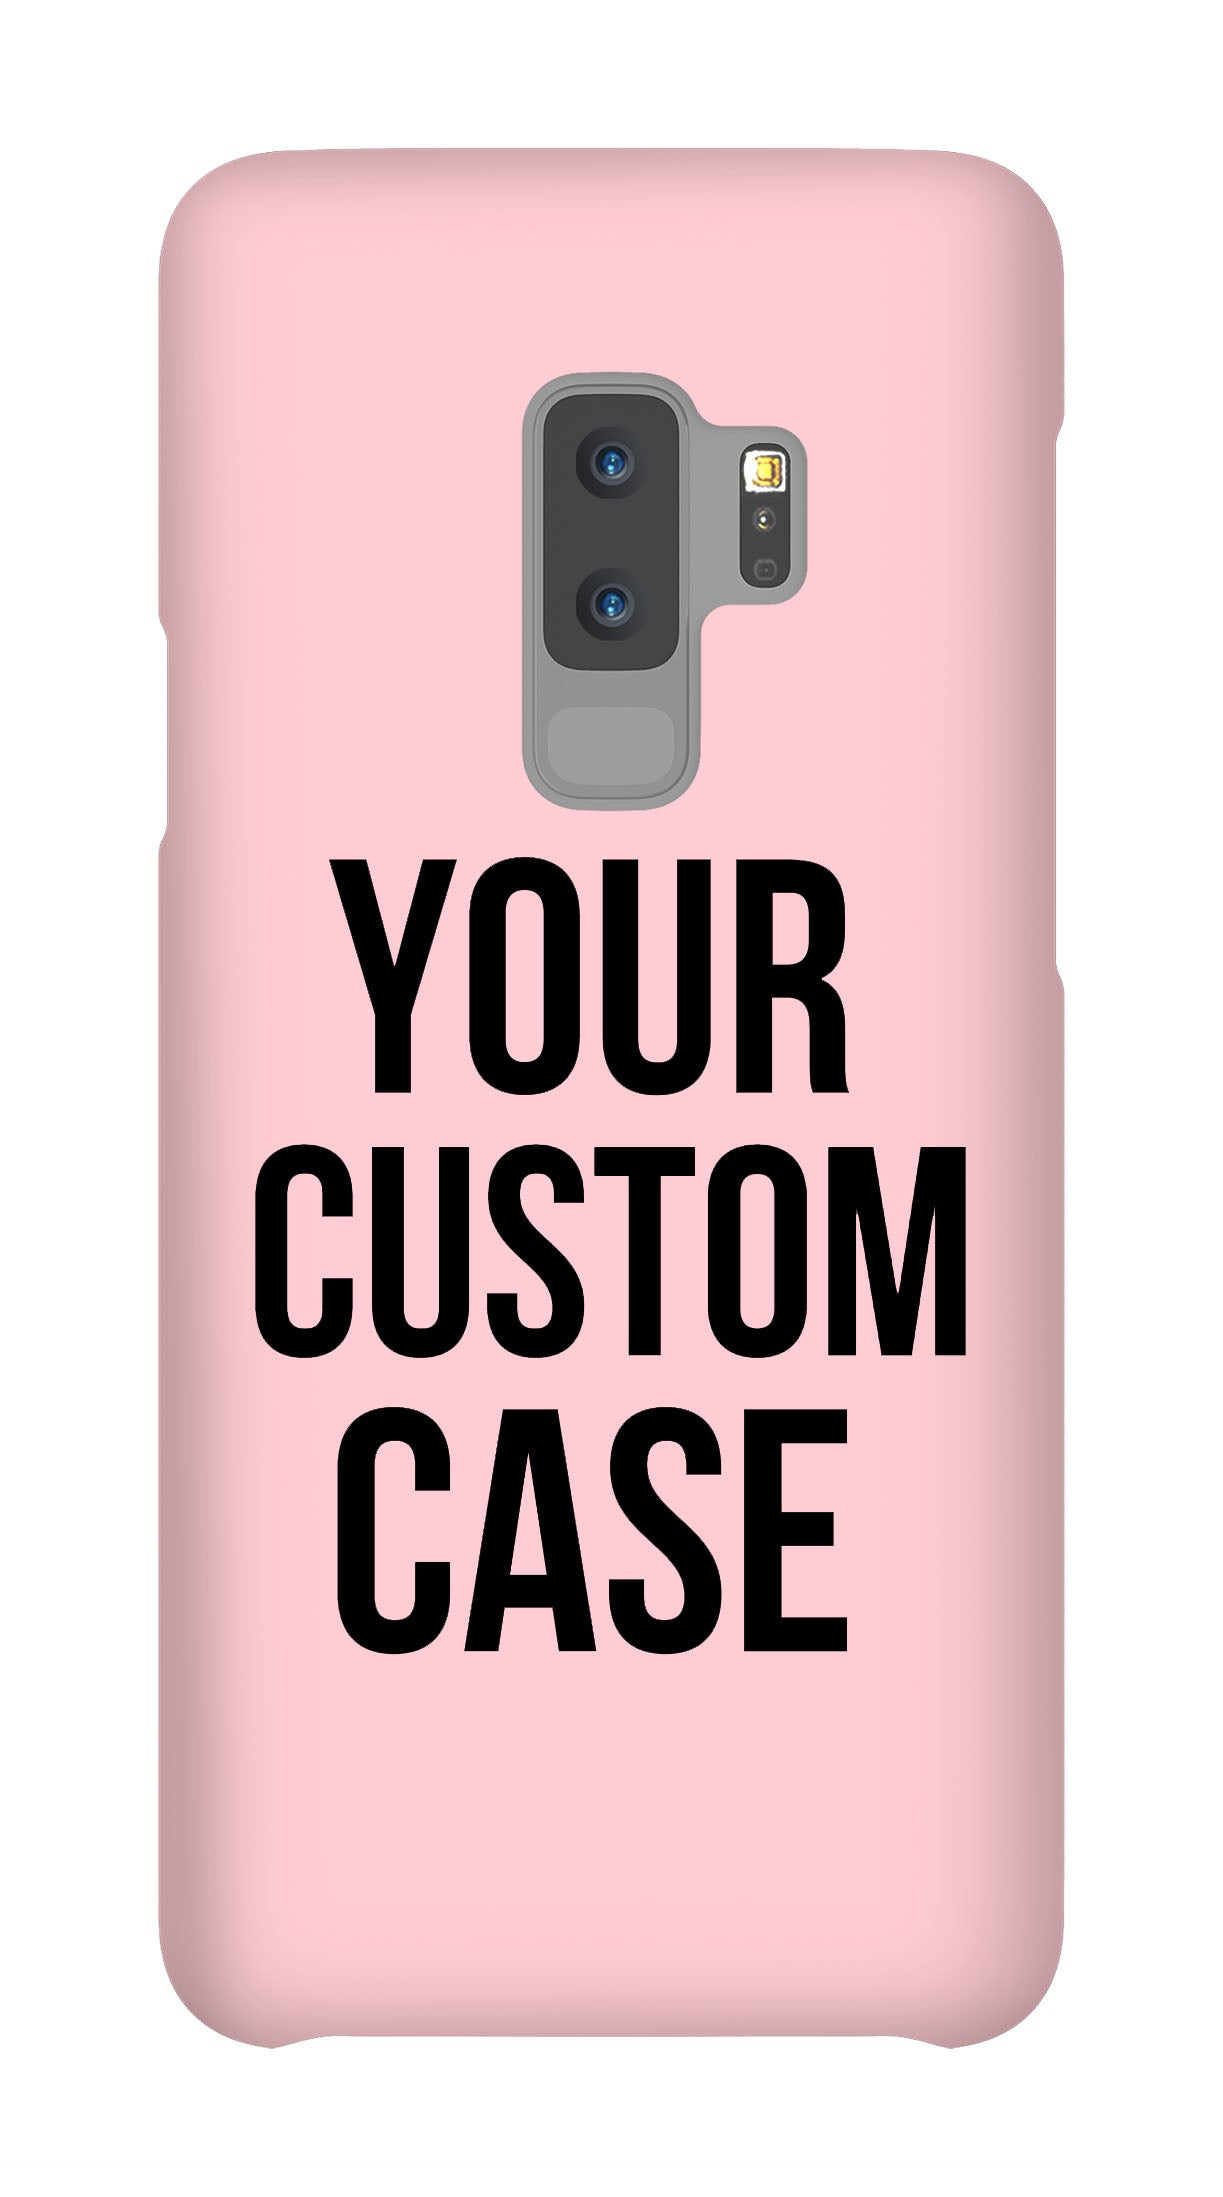 Custom Galaxy S9 Plus Slim Case - Your Custom Design in Cart will be Shipped - Pixly Case